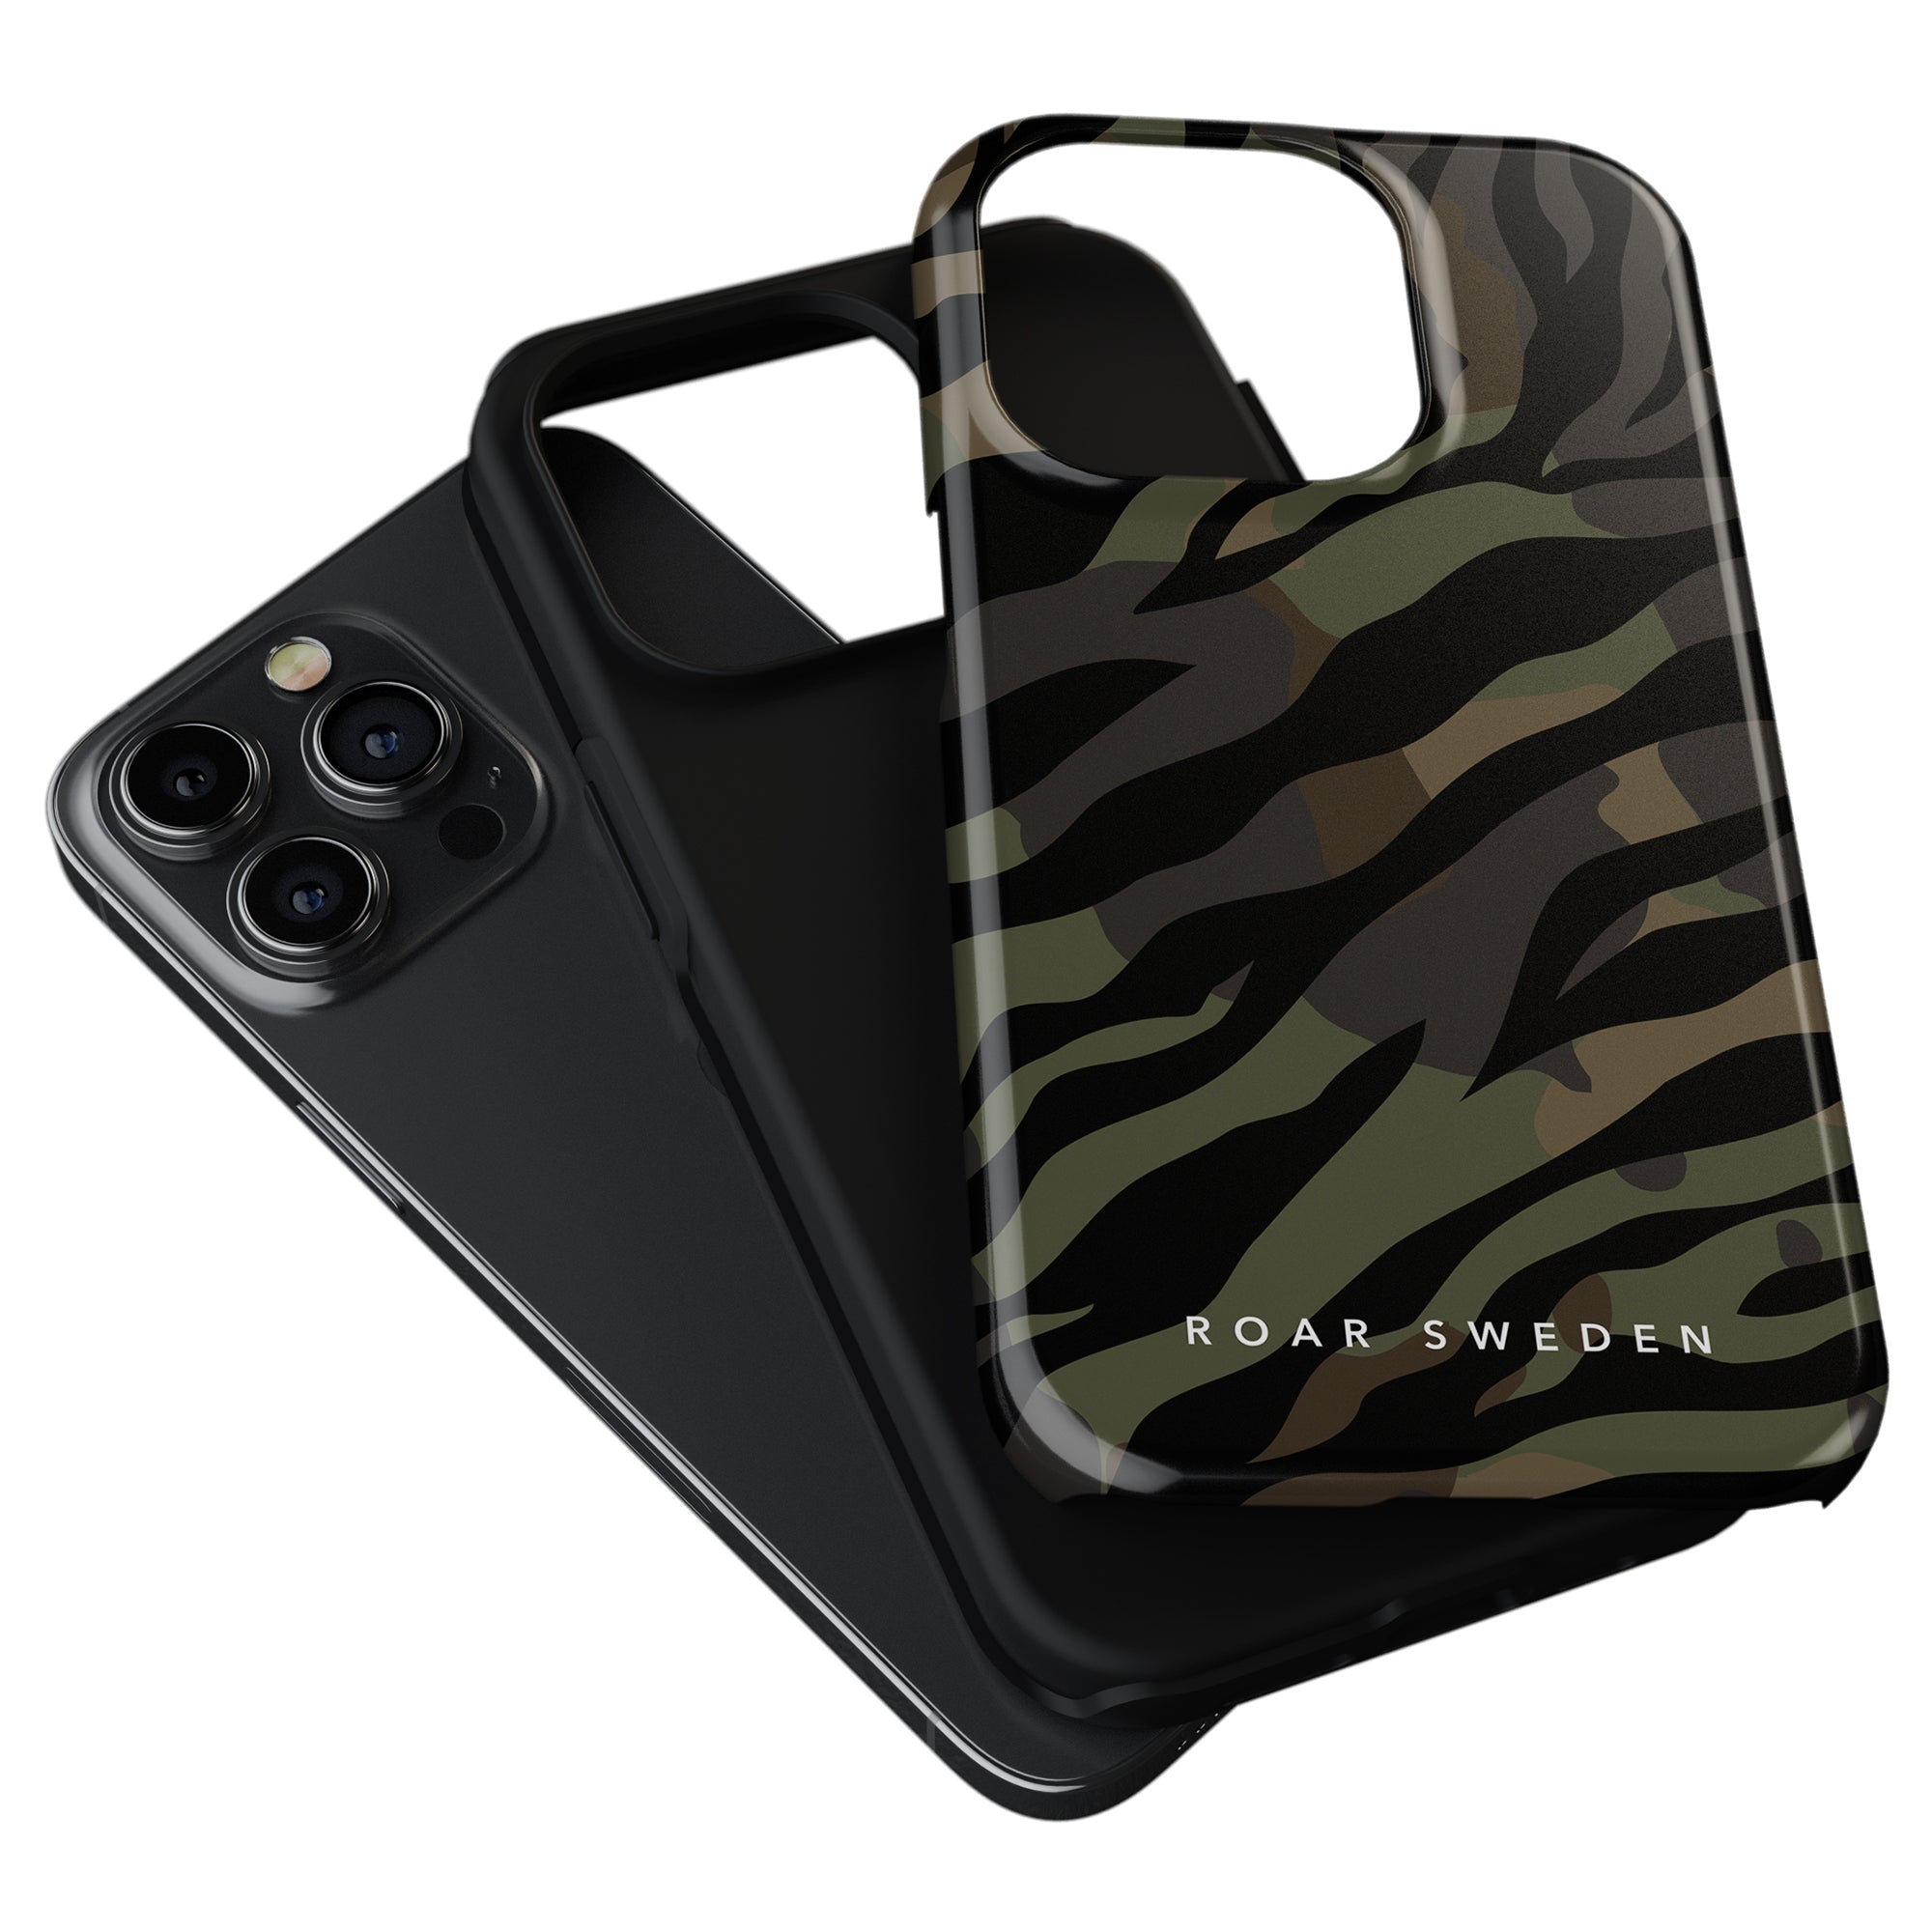 A rugged camouflage case featuring a fierce tiger design, specially designed for the Army - Tough Case.